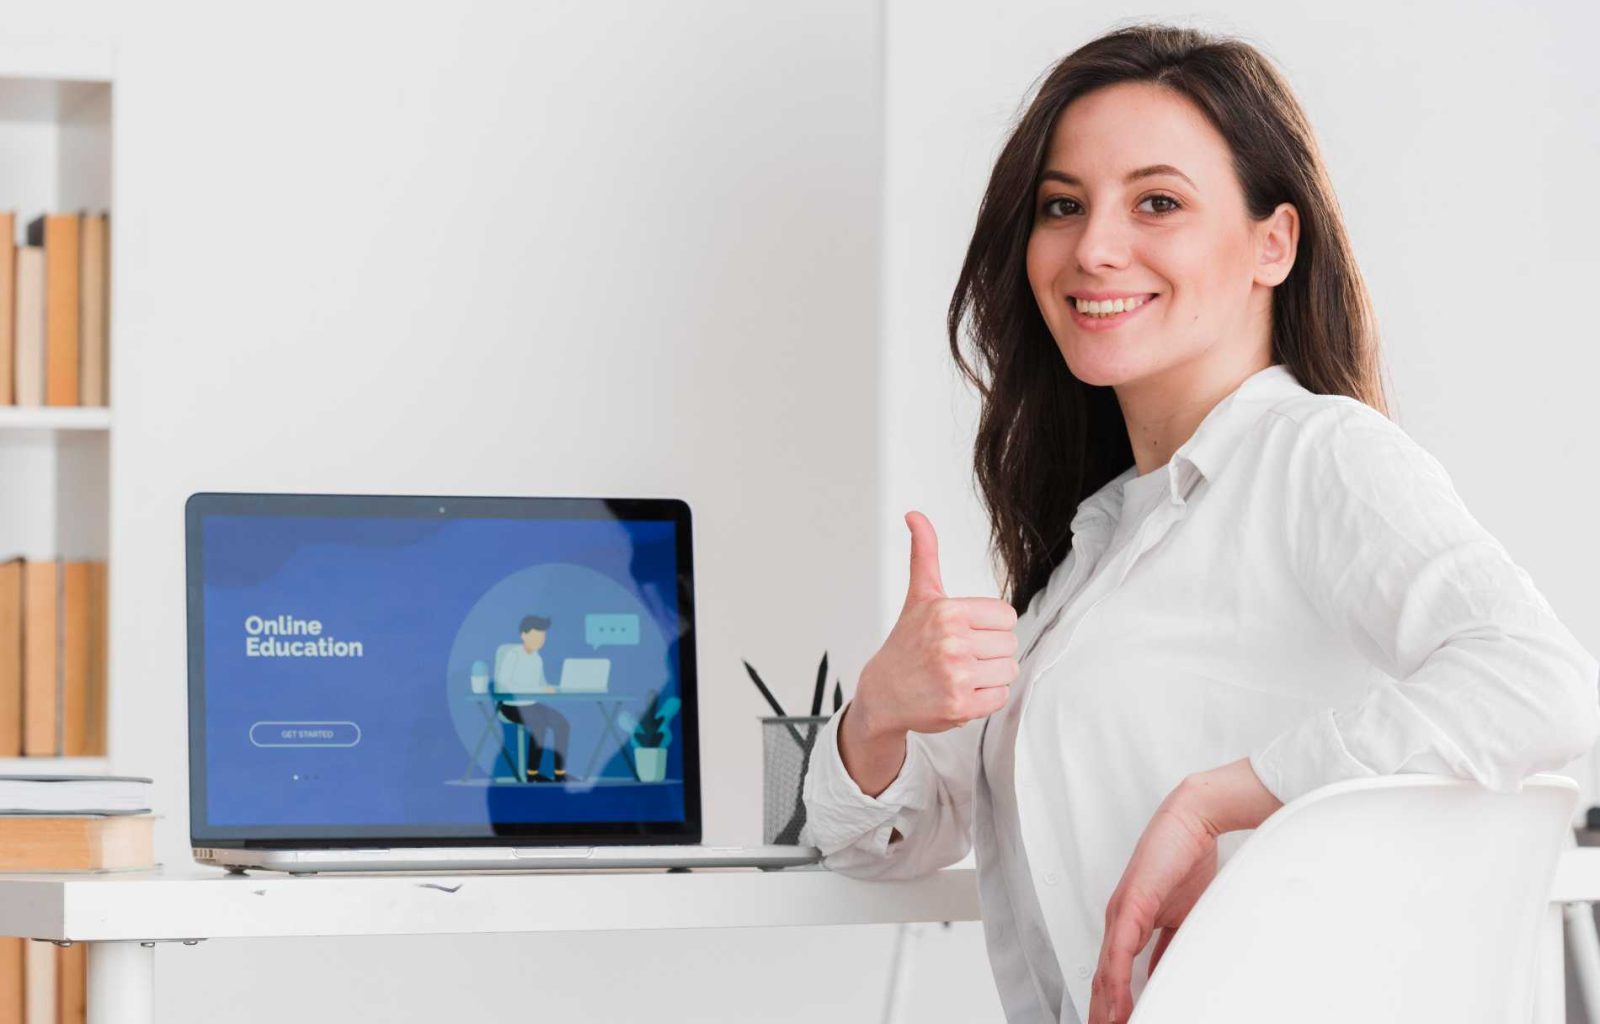 woman-doing-thumbs-up-gesture-e-learning-concept